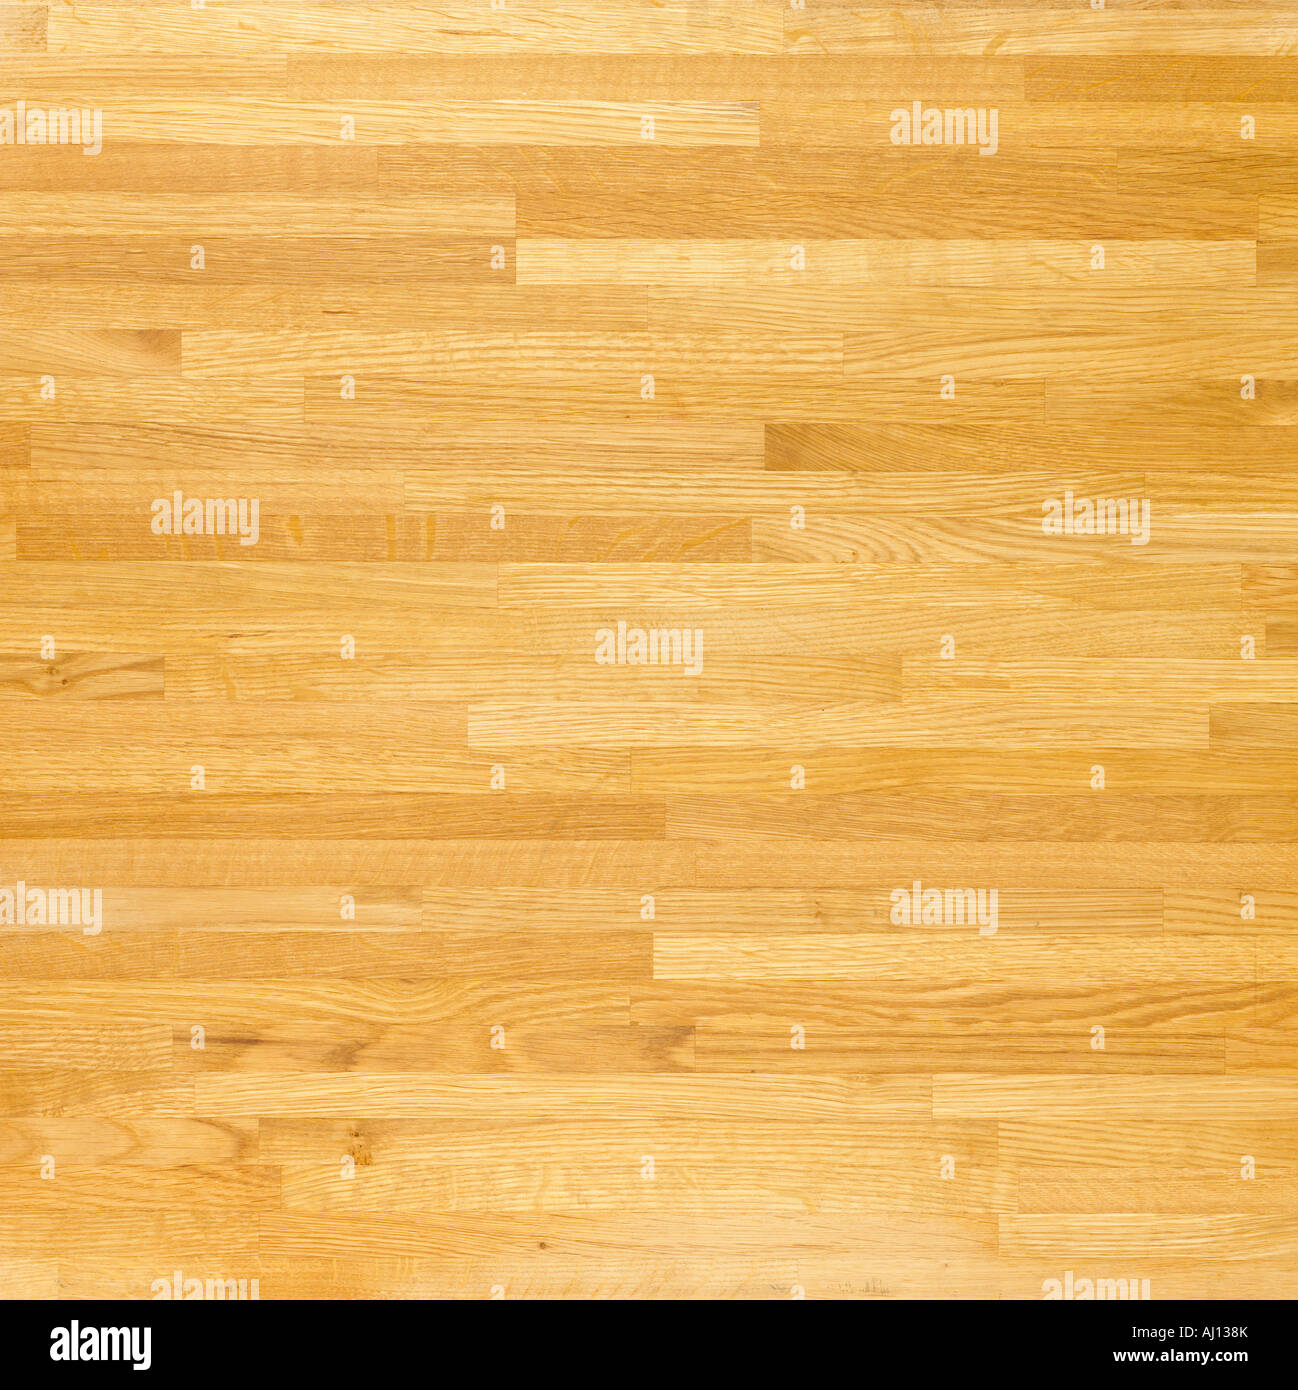 LIGHT BROWN ABSTRACT TIMBER MAPLE WOOD BACKGROUND Stock Photo